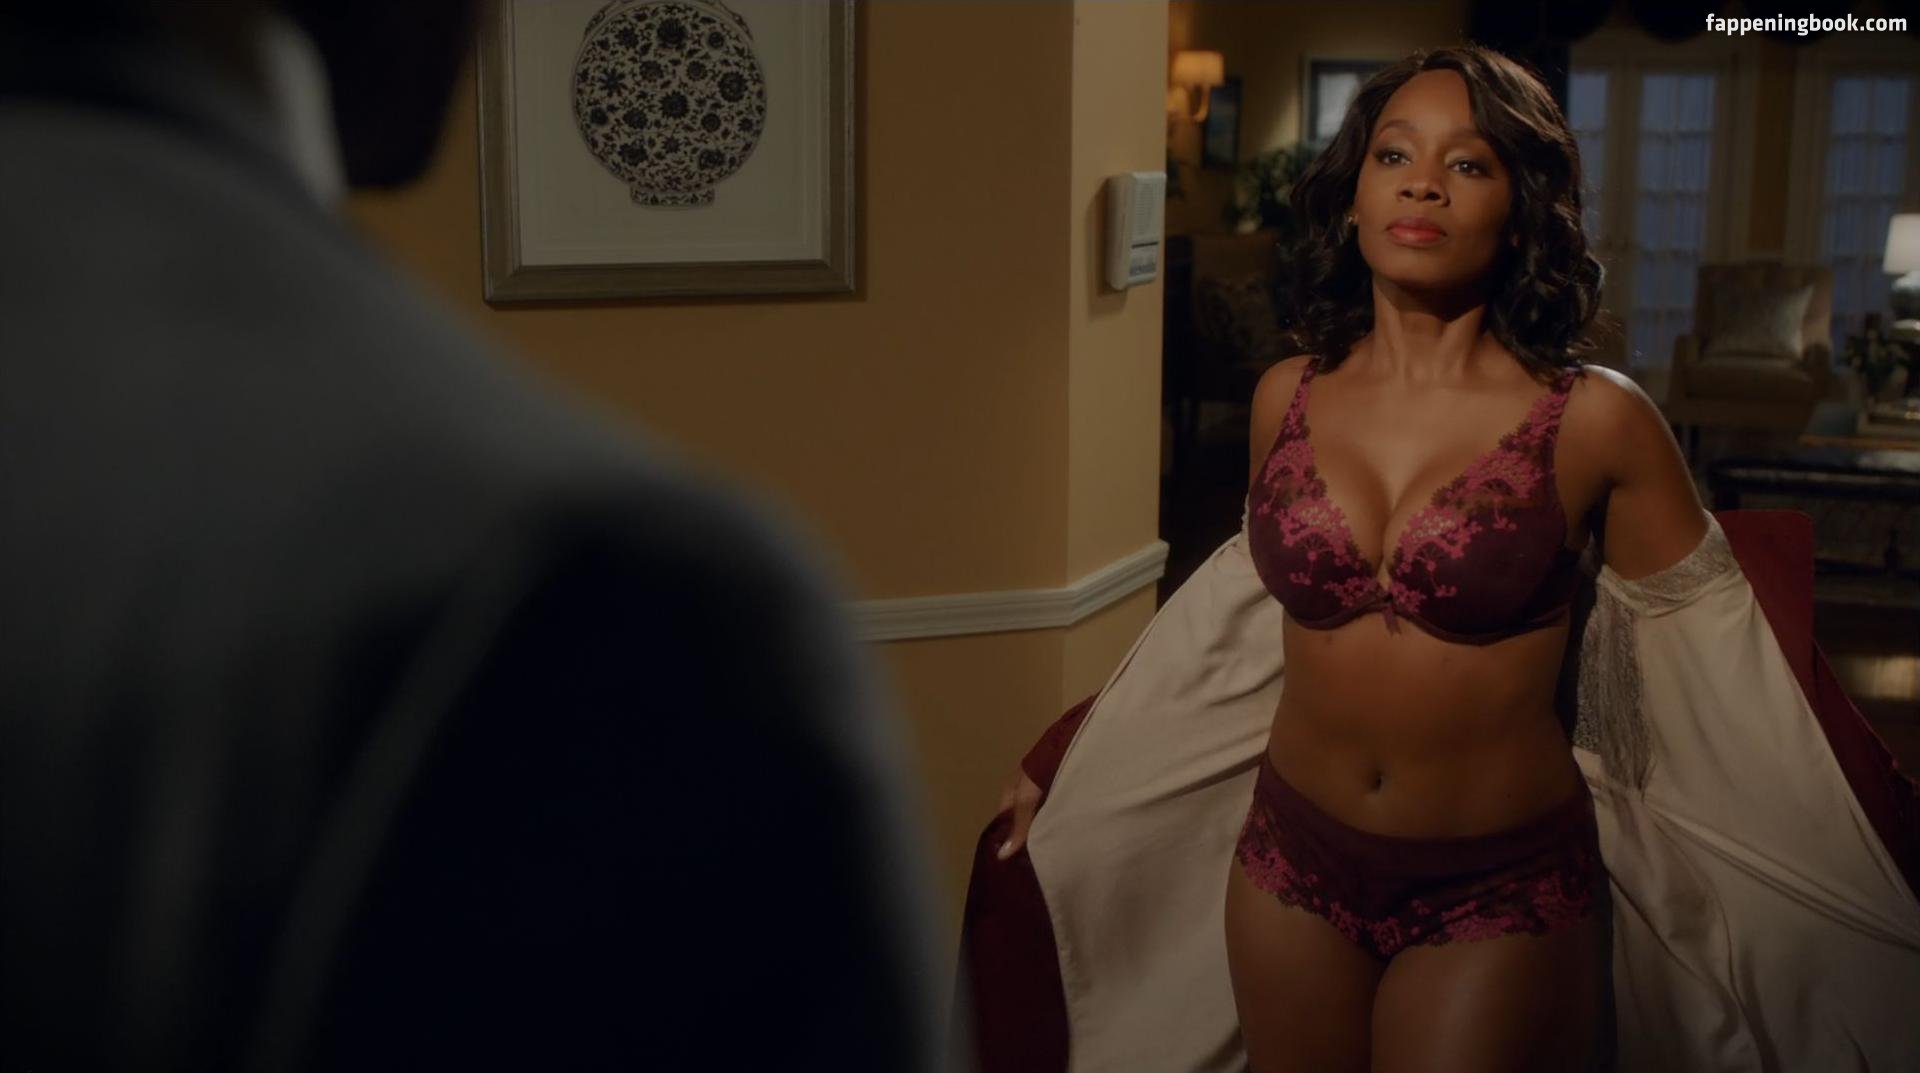 Anika Noni Rose Nude, The Fappening - Photo #37808 - FappeningBook.